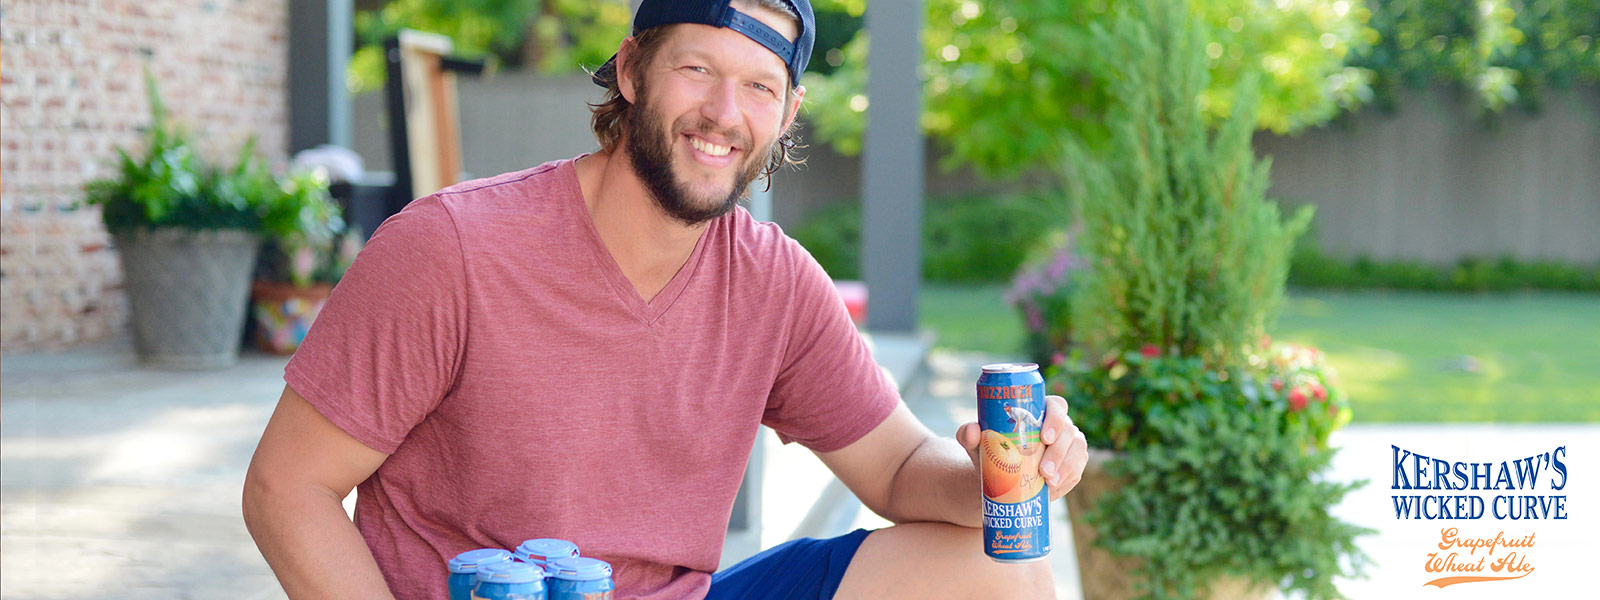 Clayton Kershaw with Kershaw's Wicked Curve Grapefruit Wheat Ale